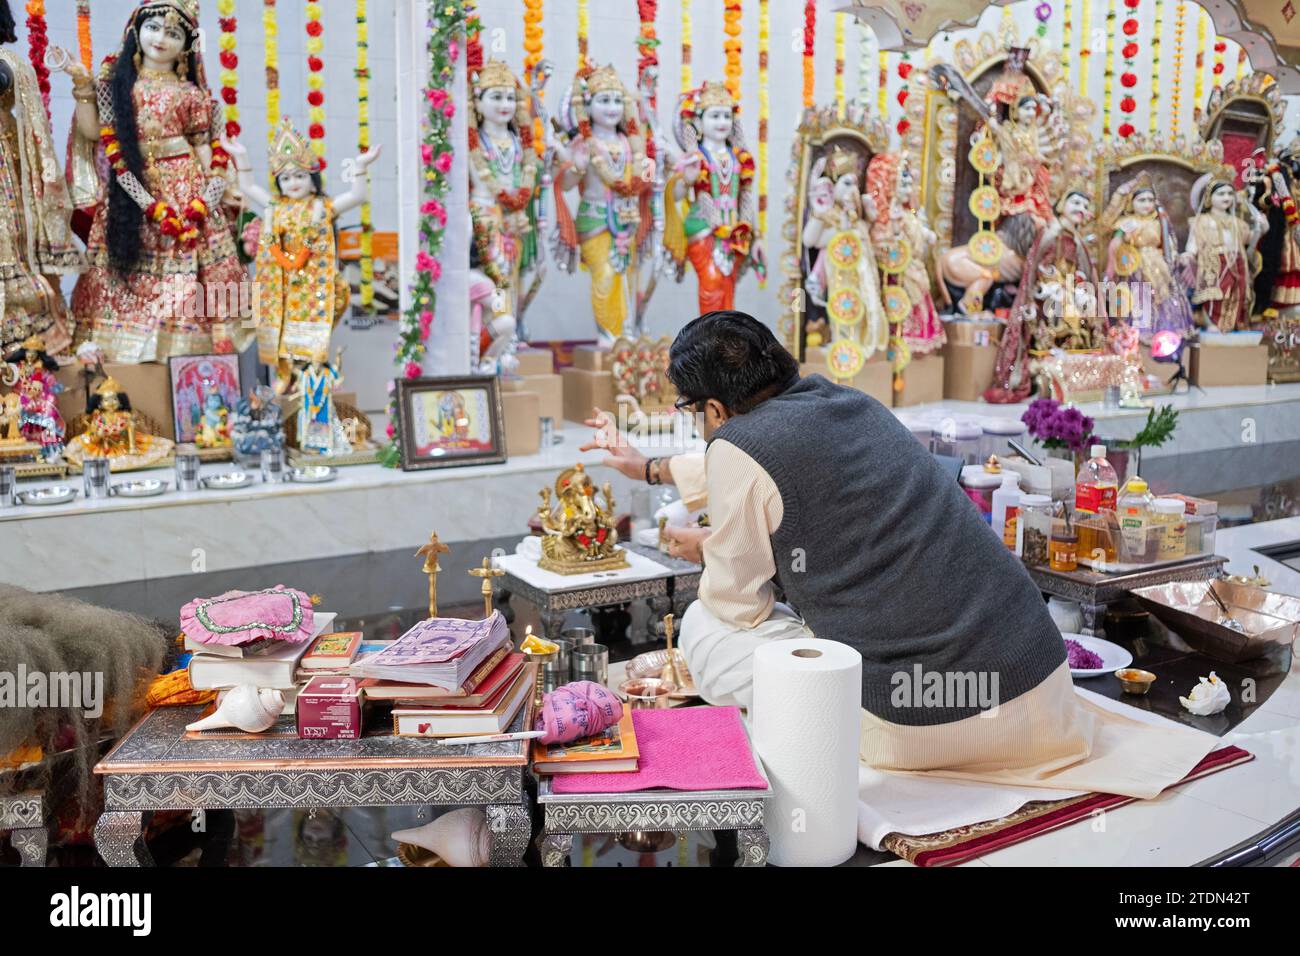 A Hindu priest puts a bindi on a small statue of Ganesh at the Geeta Hindu temple in Corona, Queens, New York City. Stock Photo